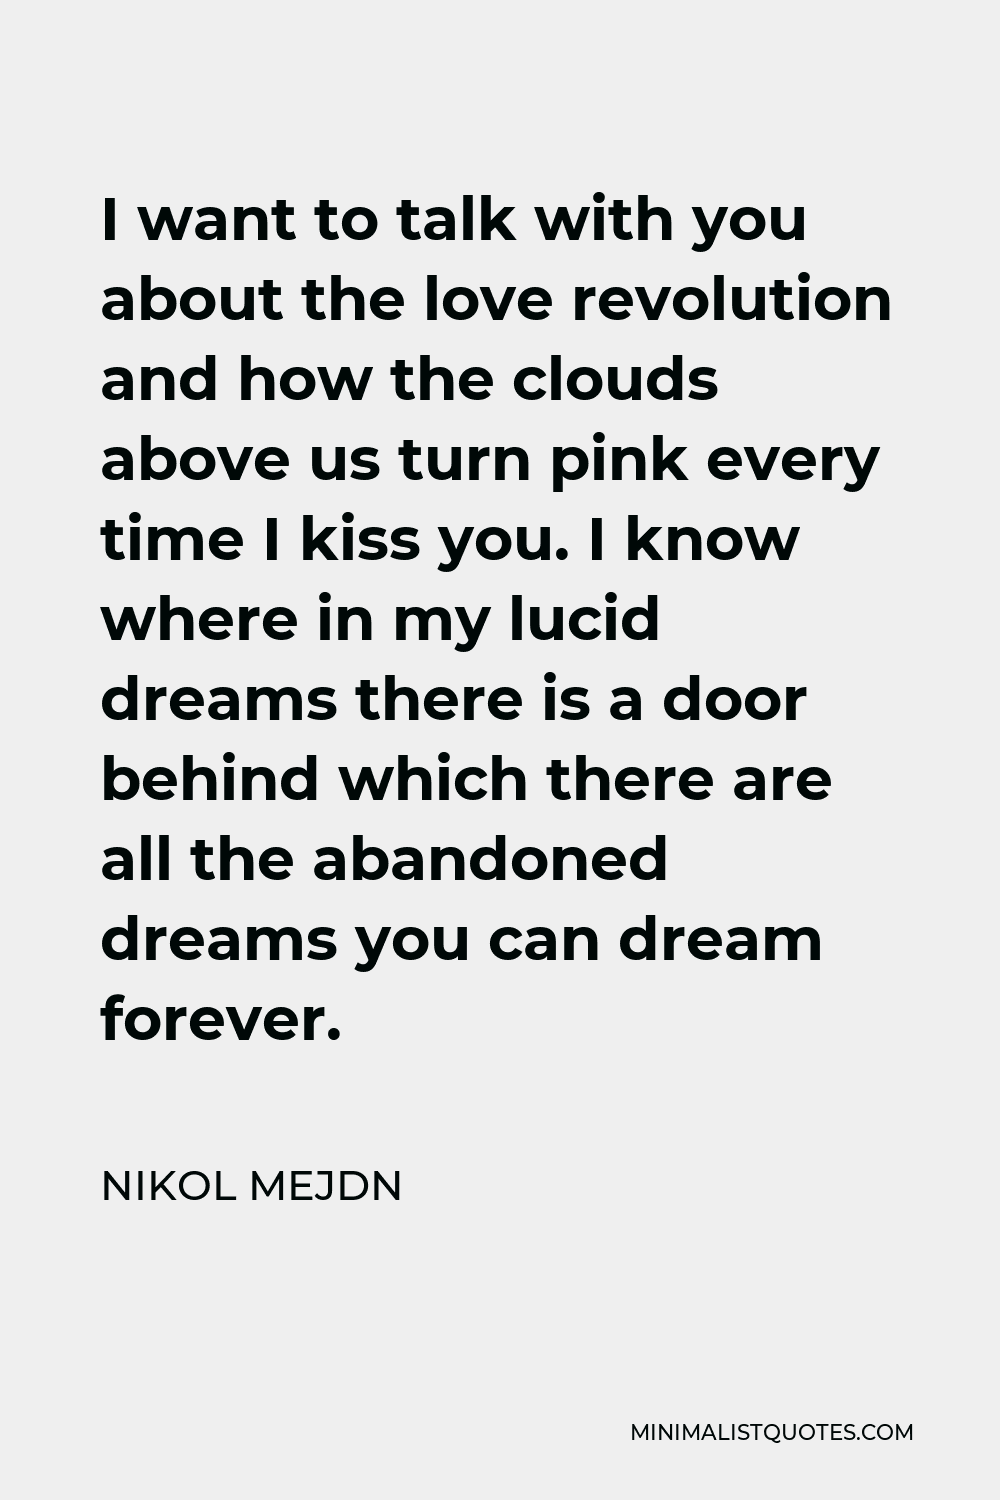 Nikol Mejdn Quote - I want to talk with you about the love revolution and how the clouds above us turn pink every time I kiss you. I know where in my lucid dreams there is a door behind which there are all the abandoned dreams you can dream forever.